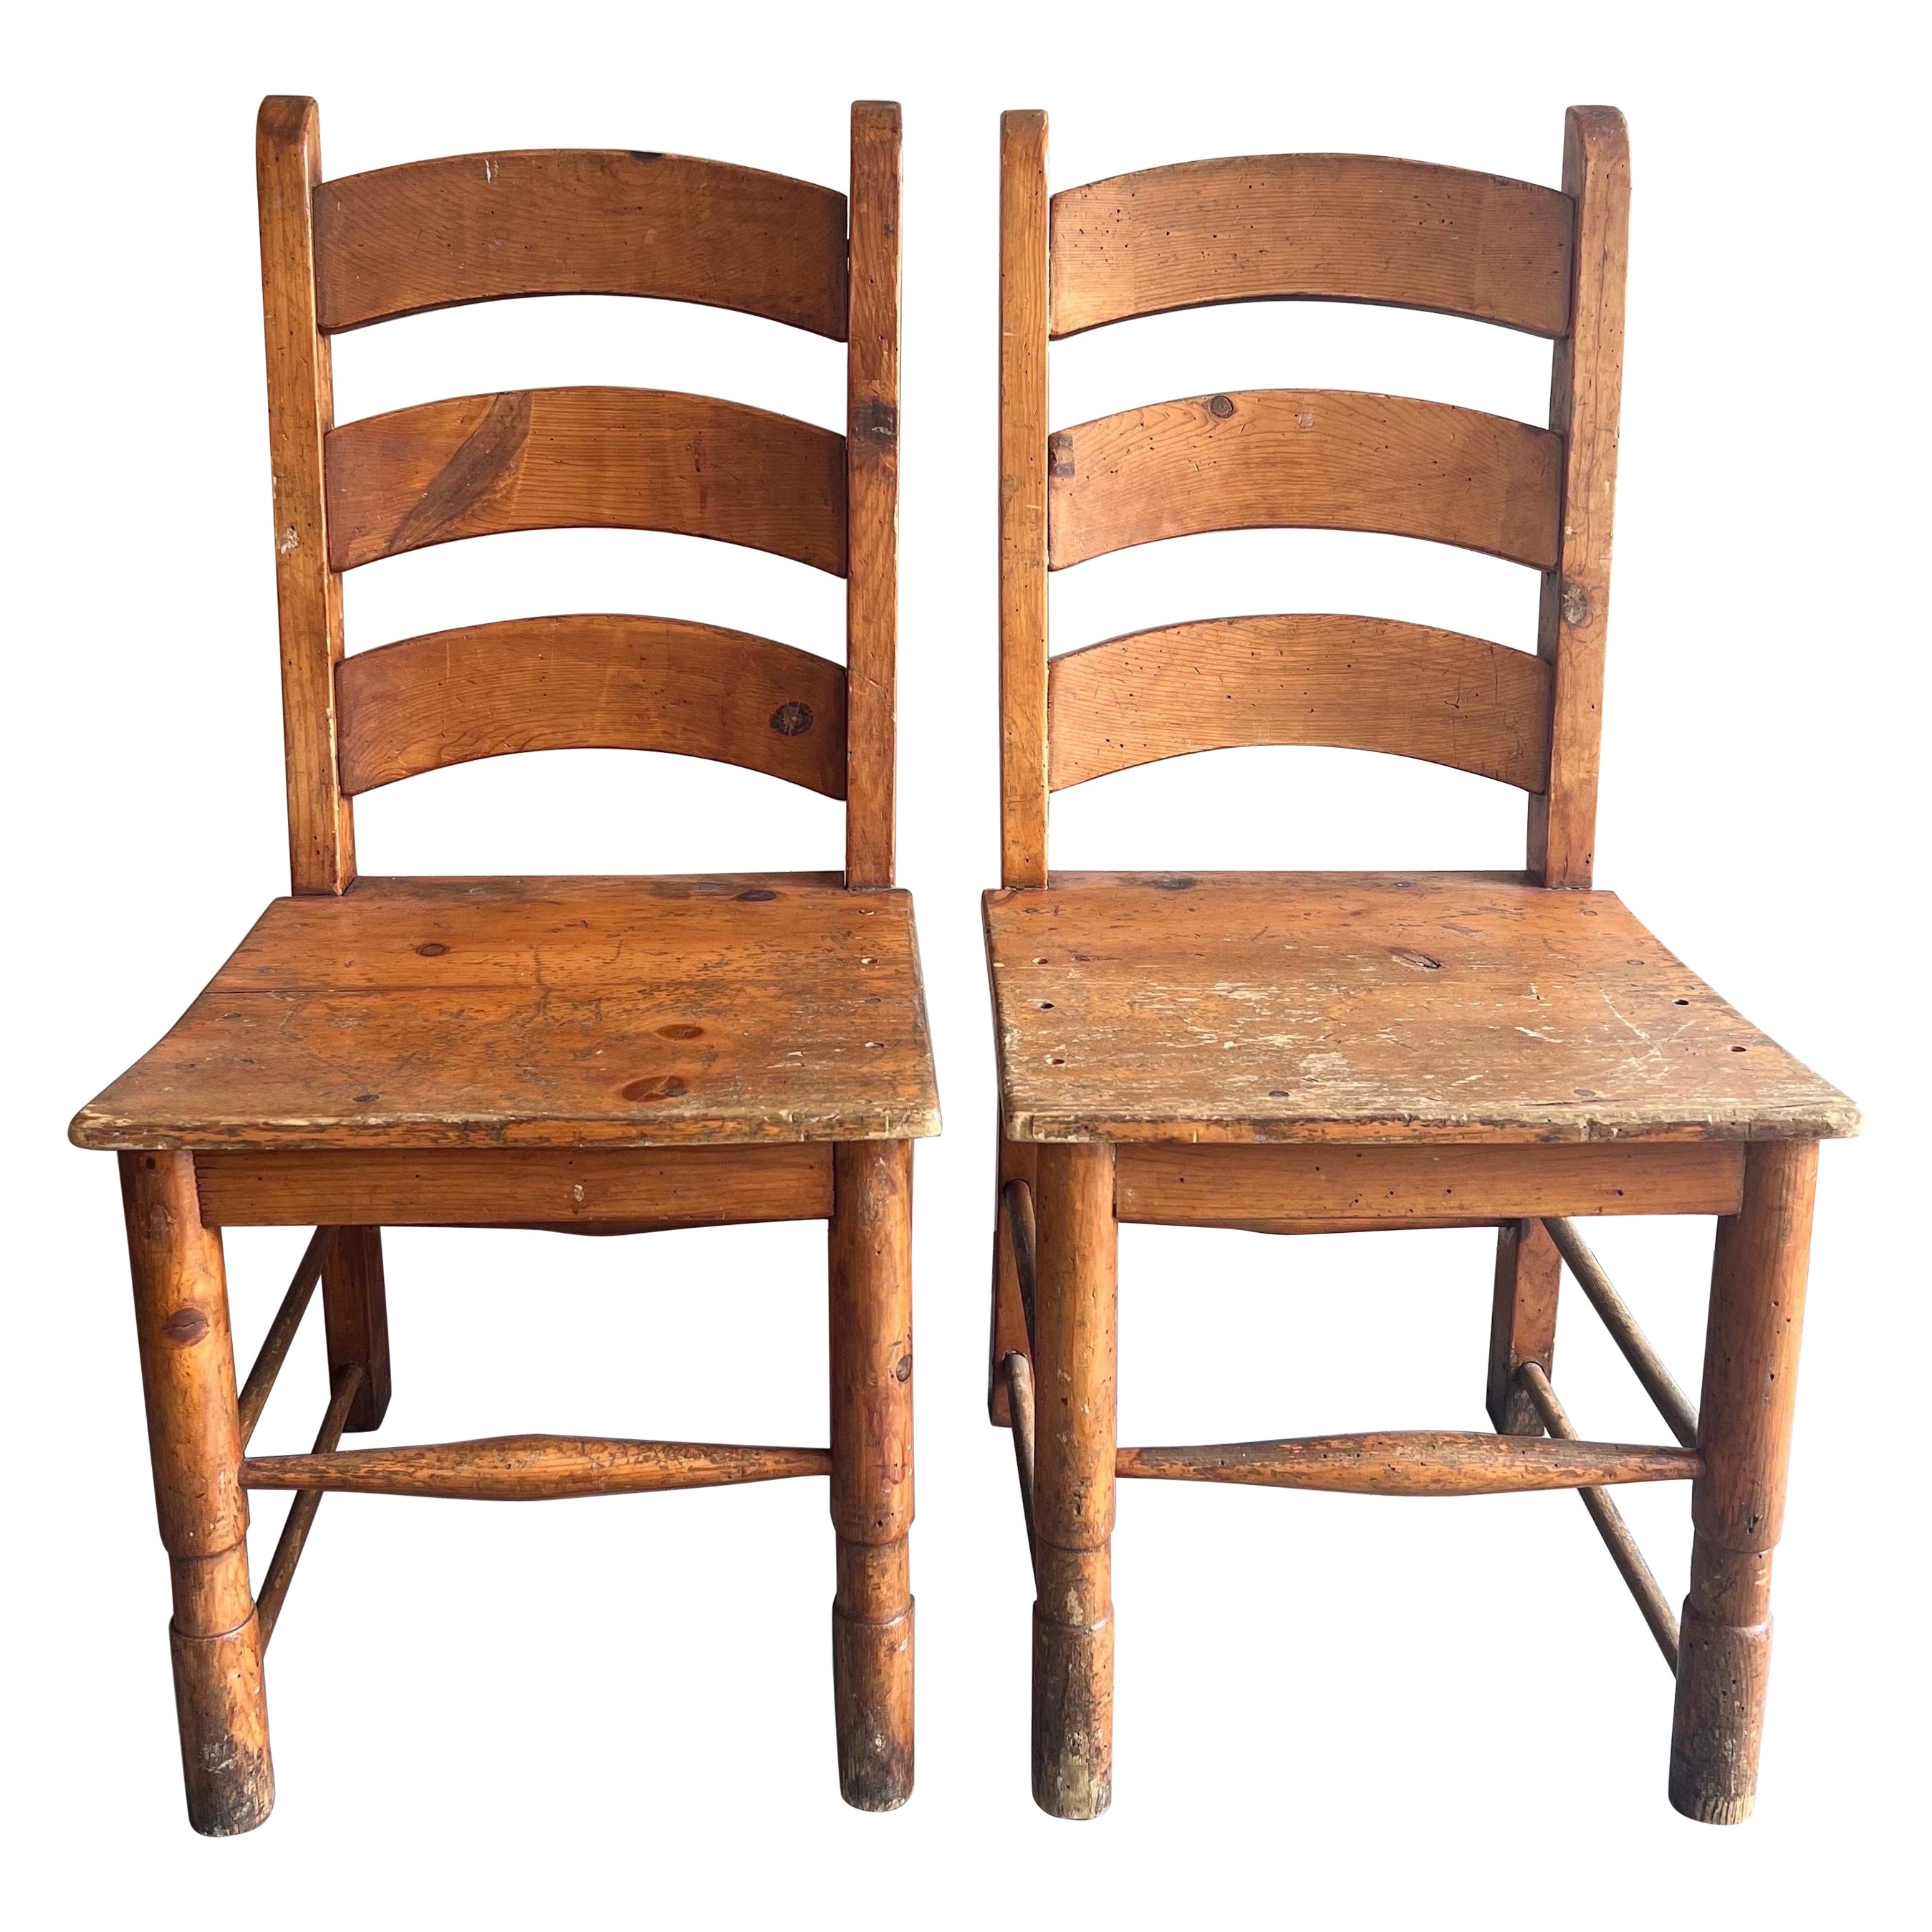 Pair of Early 20th Century Antique French Country Style Chairs